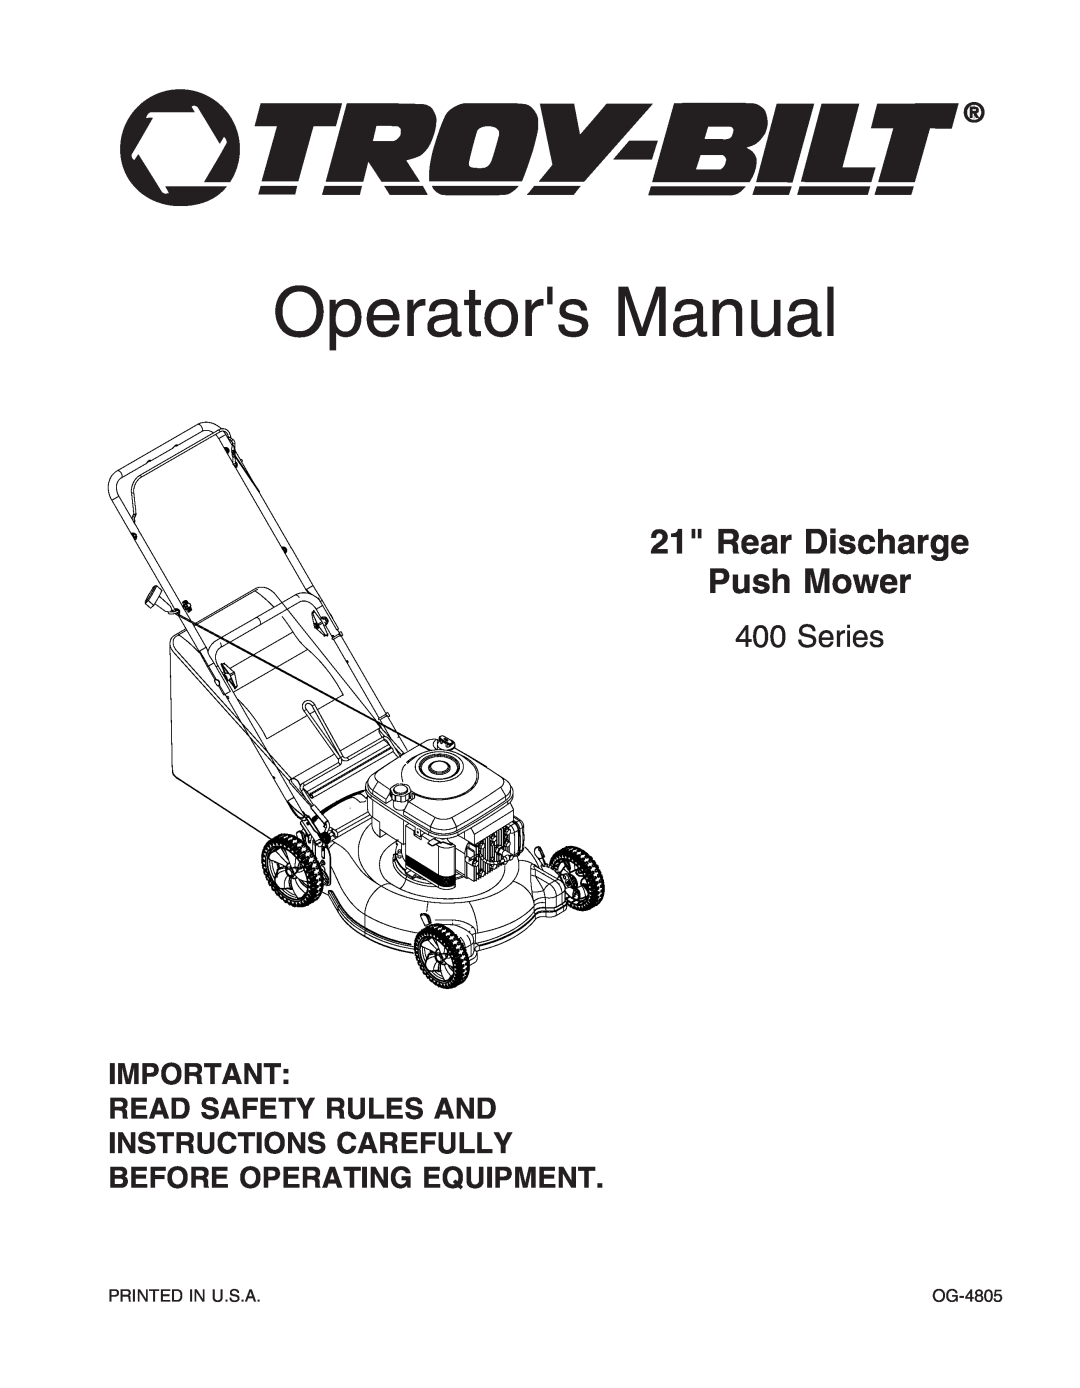 Troy-Bilt 400 Series manual Read Safety Rules And Instructions Carefully, Before Operating Equipment, Operators Manual 